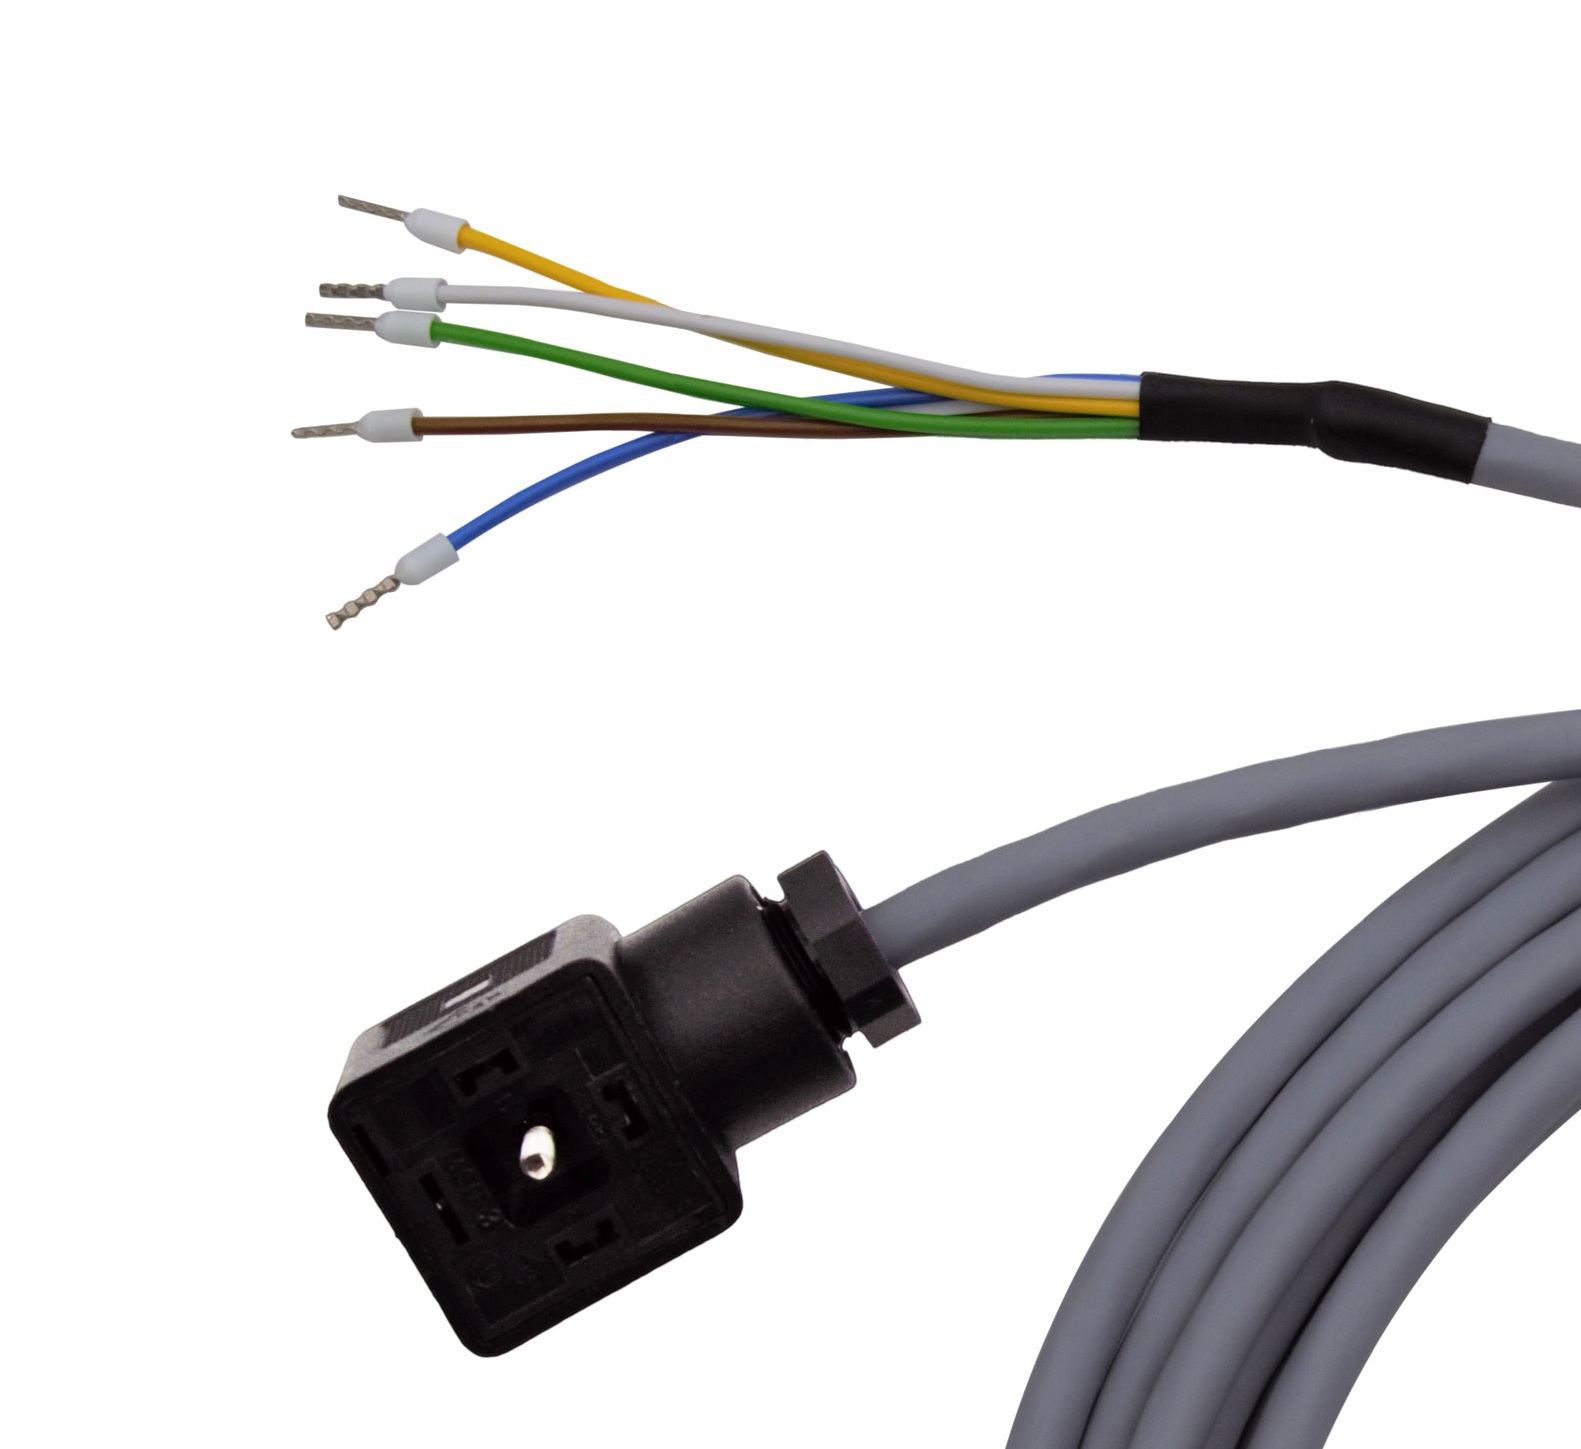 3 meter connection cable for N-LF measuring cells, 4-core 0.25² with shielding